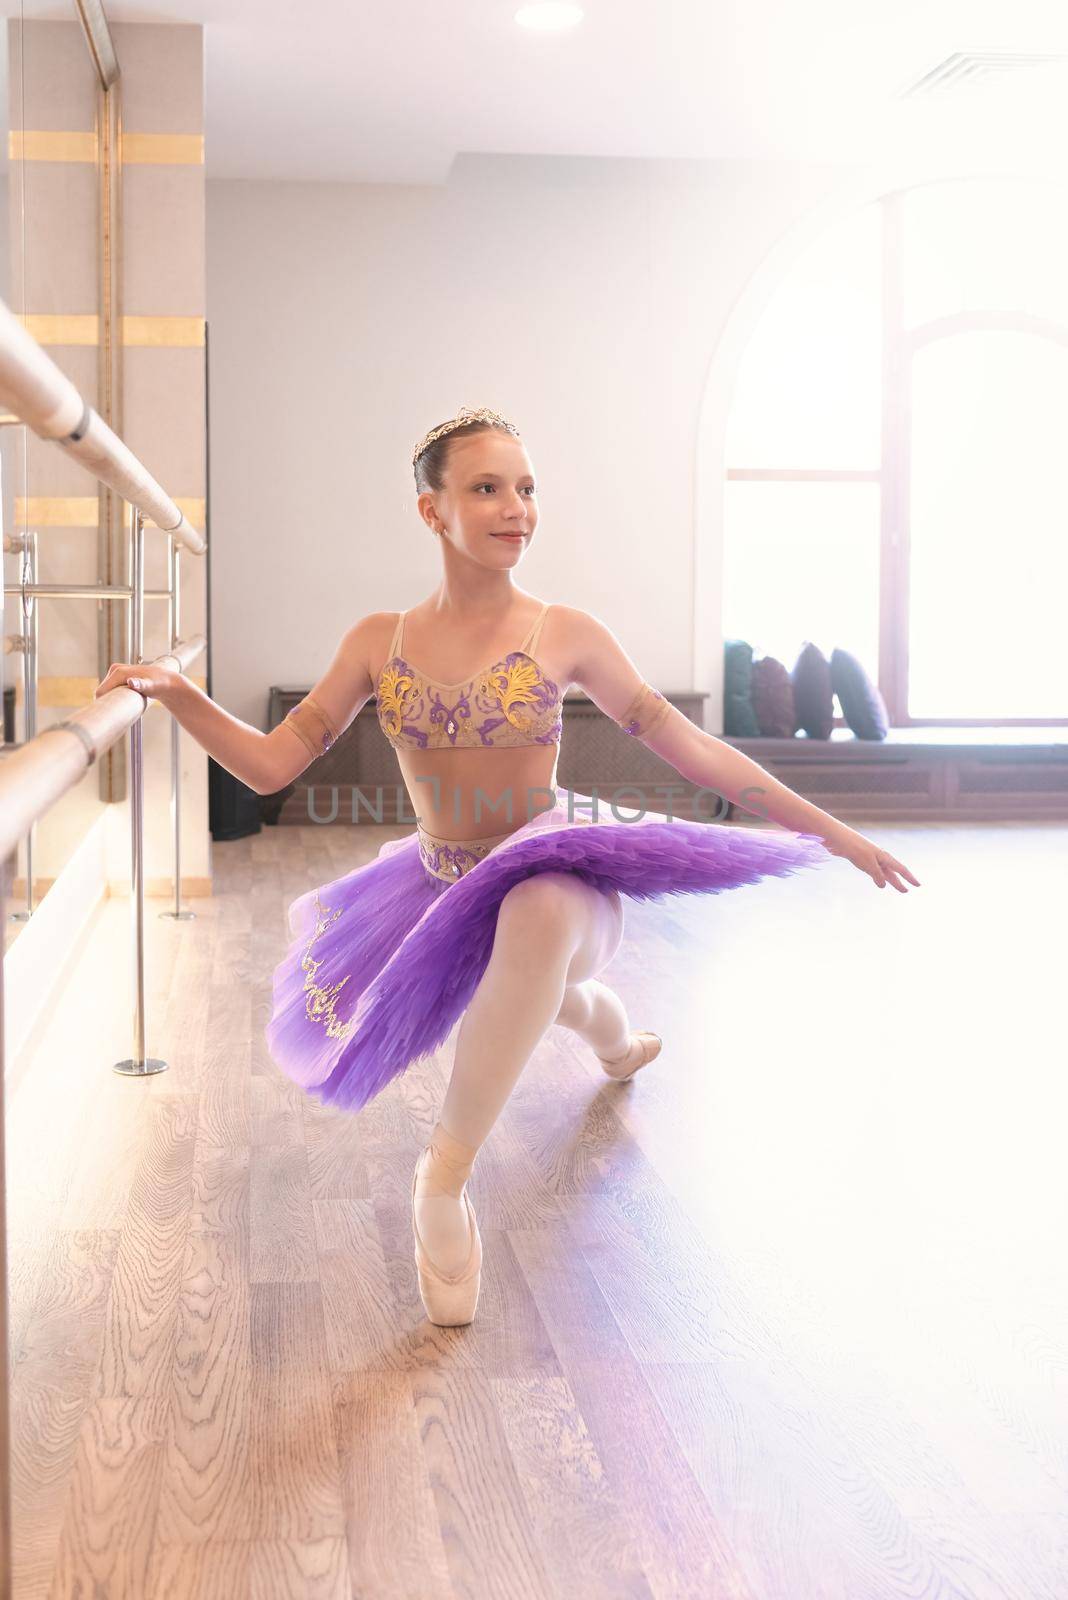 Close-up of a smiling teenage girl wearing pointe shoes in ballet class, near a frame and large mirror doing exercises and stretching by Nickstock